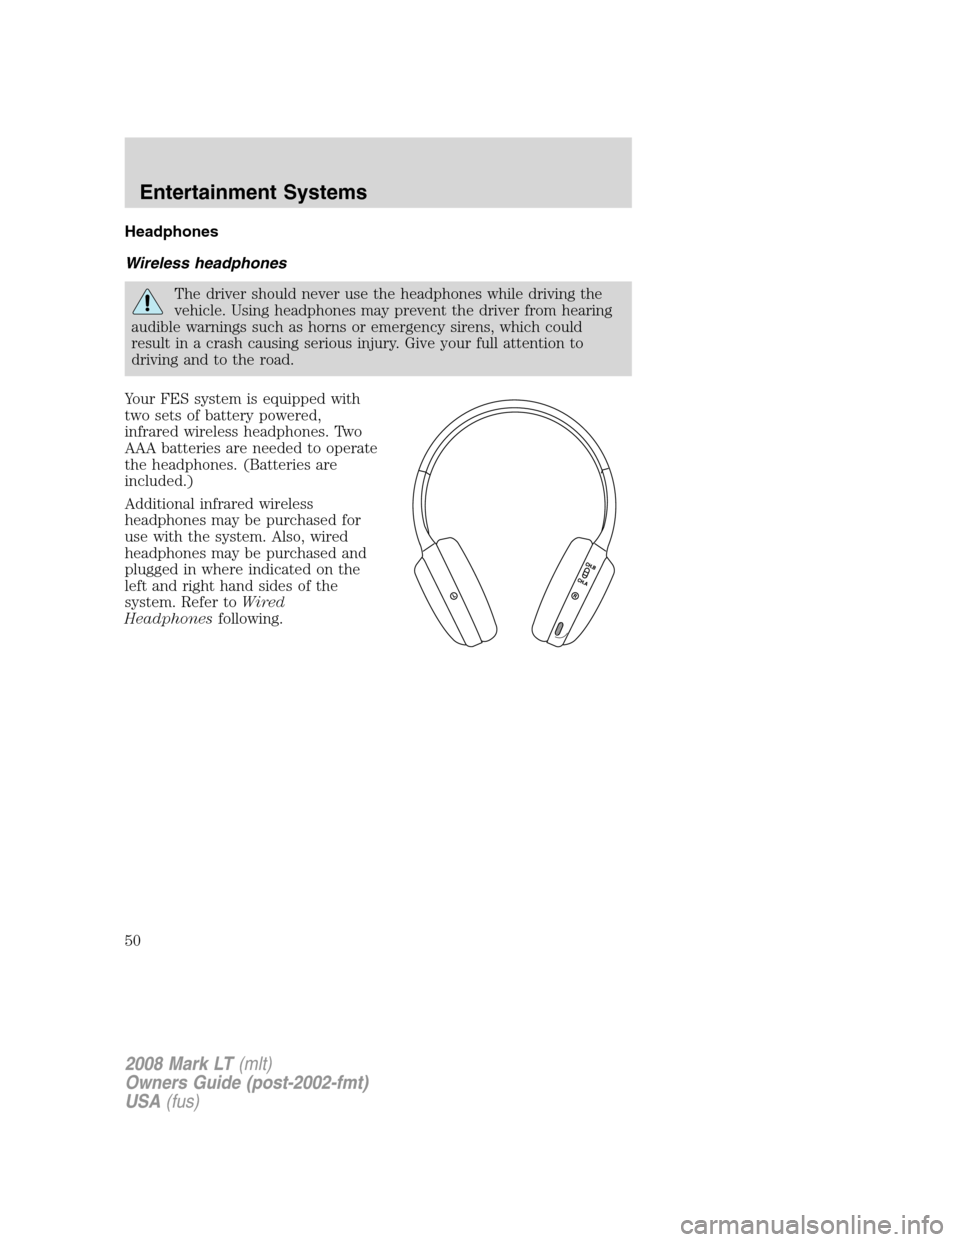 LINCOLN MARK LT 2008 Service Manual Headphones
Wireless headphones
The driver should never use the headphones while driving the
vehicle. Using headphones may prevent the driver from hearing
audible warnings such as horns or emergency si